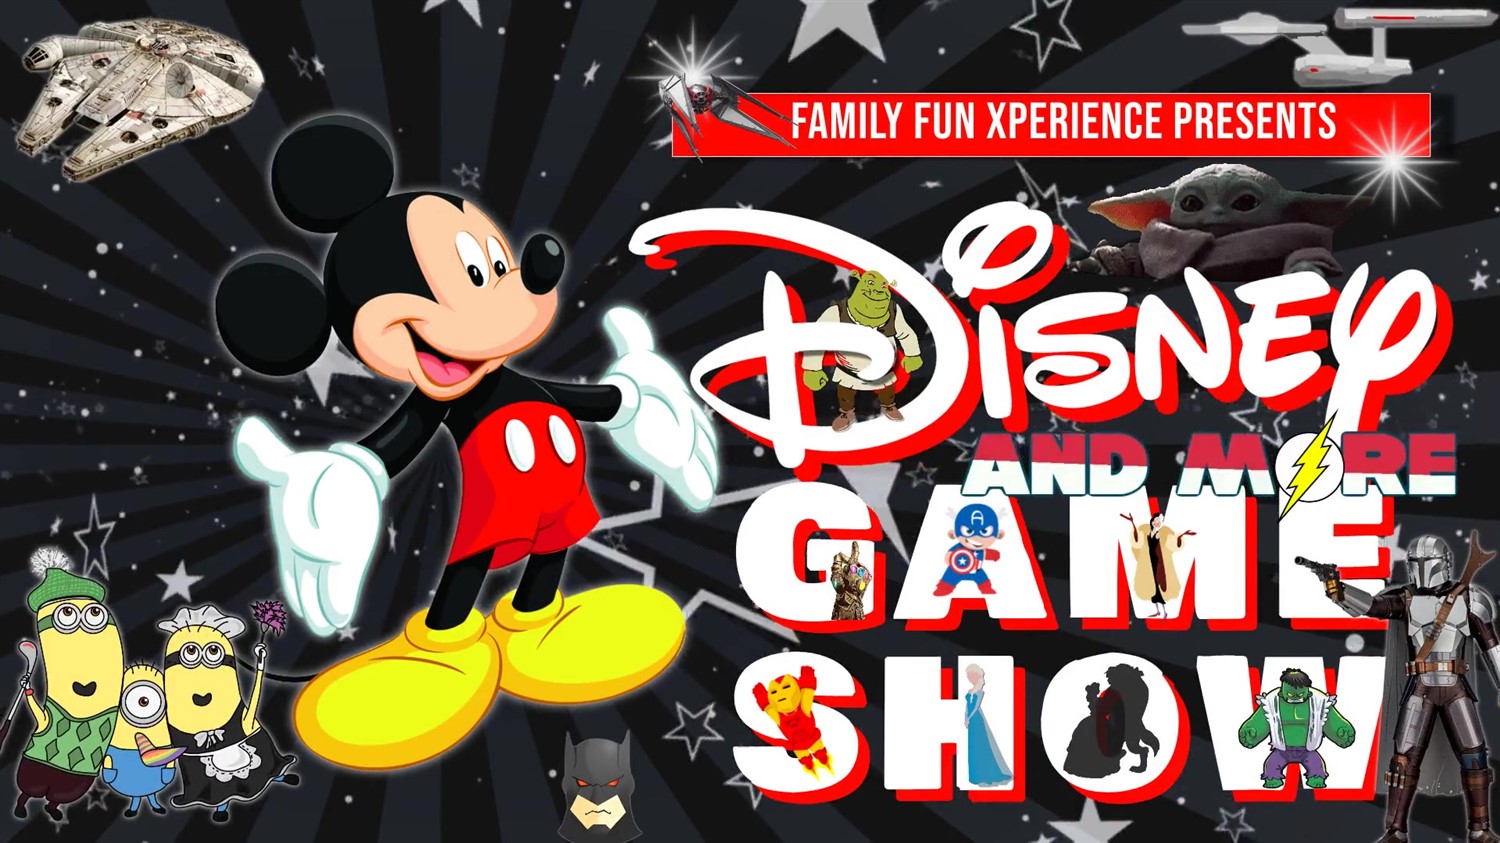 DISNEY & MORE GAME SHOW Animation, movies, sci-fi, superheroes, & much more! on Jul 12, 19:00@FFX Theatre - Pick a seat, Buy tickets and Get information on Family Fun Xperience tickets.ffxshow.org